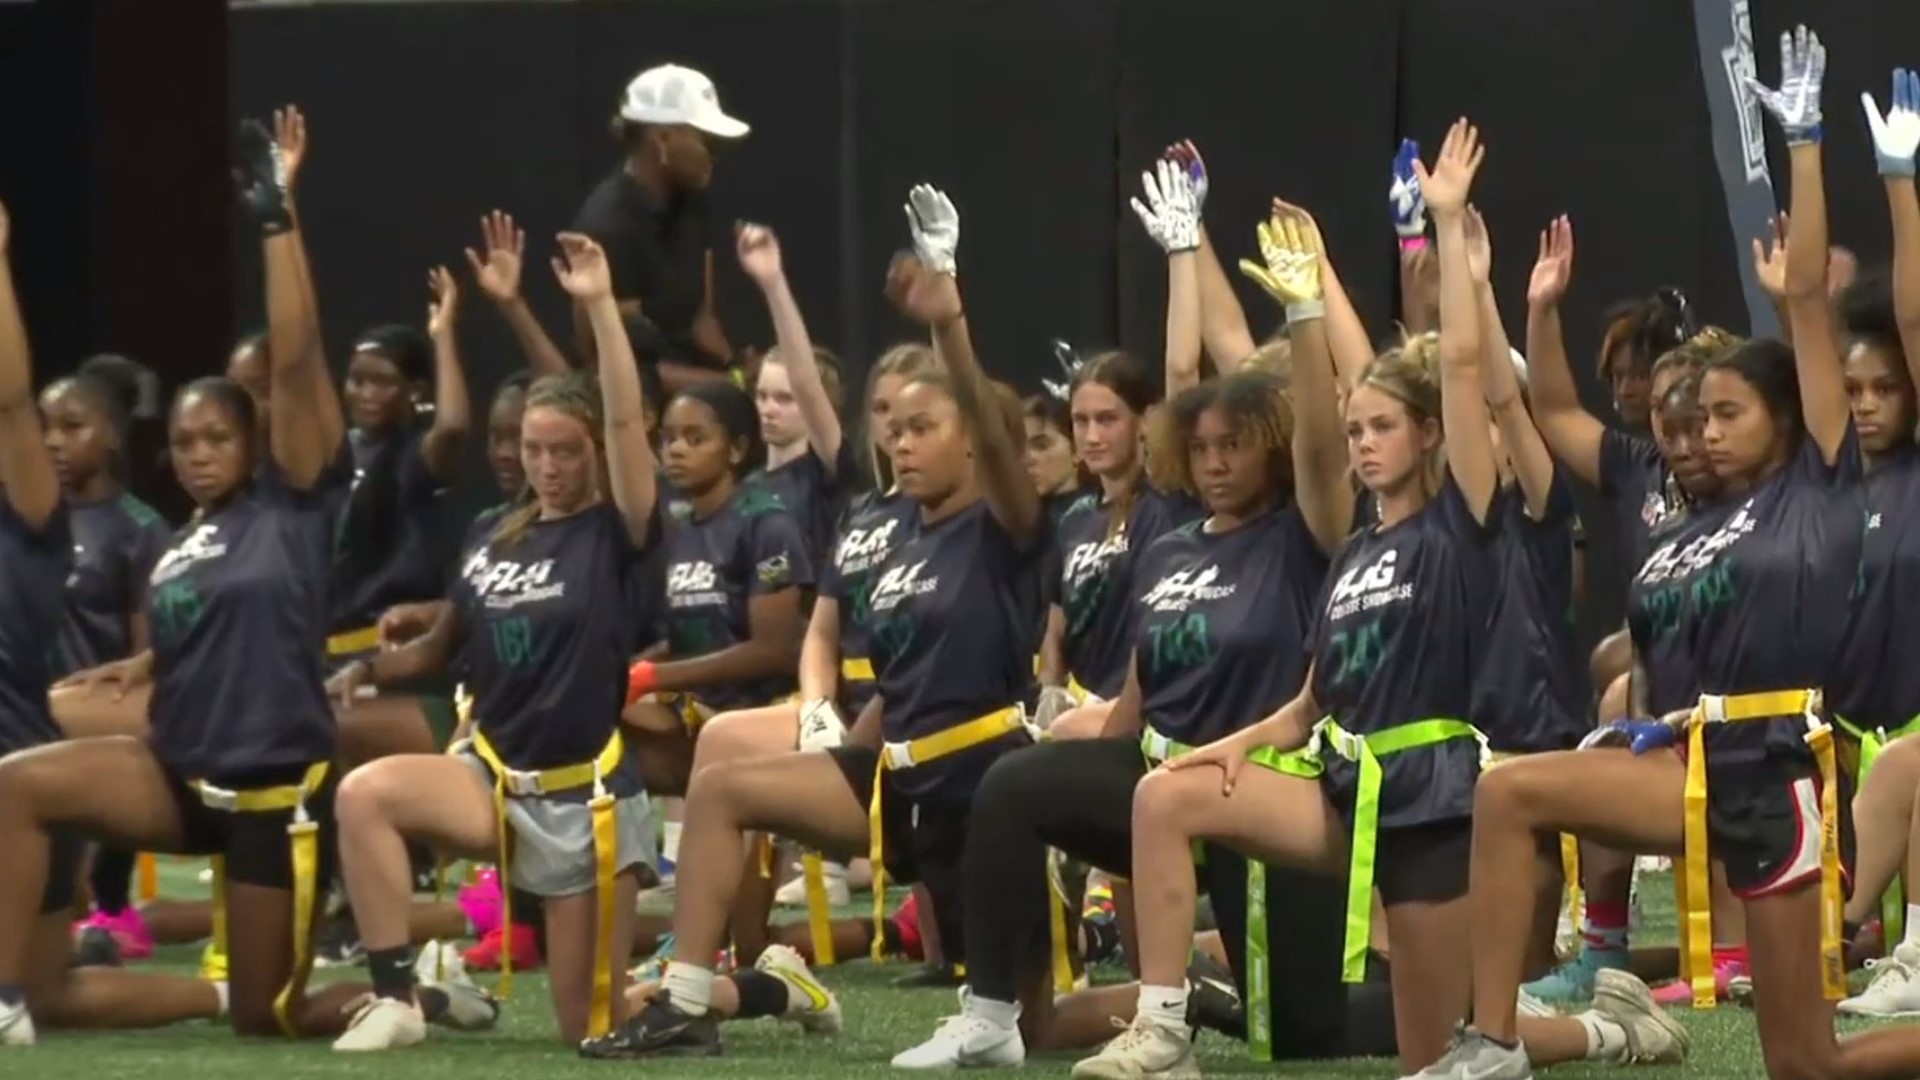 Georgia is one of only four states to offer girls flag football as a sanctioned high school sport.